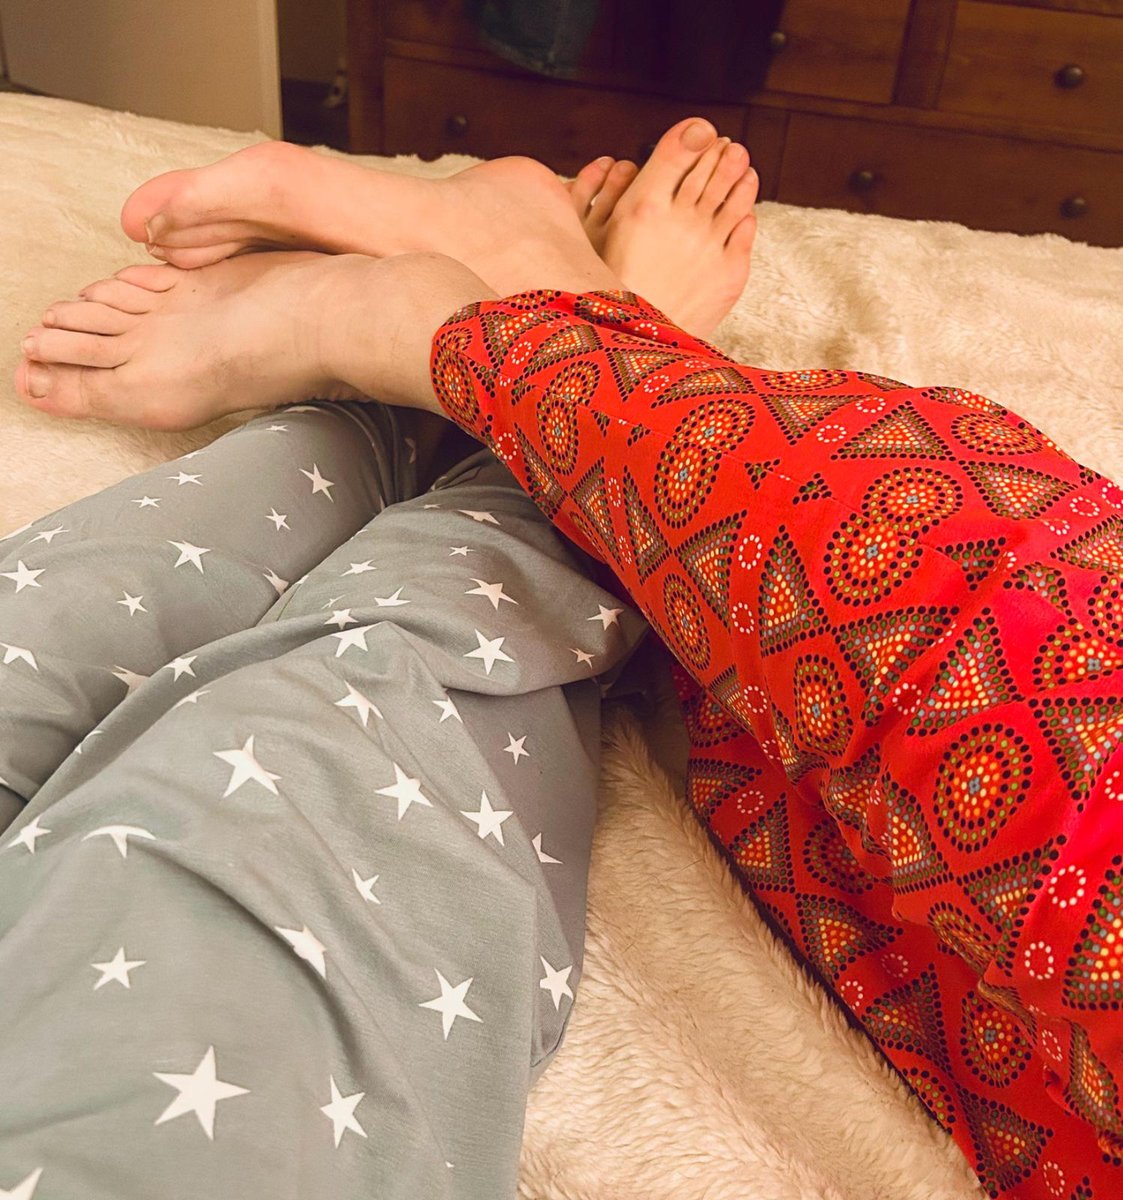 His and Hers pyjama bottoms.  Thank you to the lovely Helen for sharing this photo 🙌 Made from the same super-soft organic cotton as our undies, these lovely pyjama bottoms are perfect for sleeping in comfort or just relaxing at home. Who needs a pair of these?! 🙋